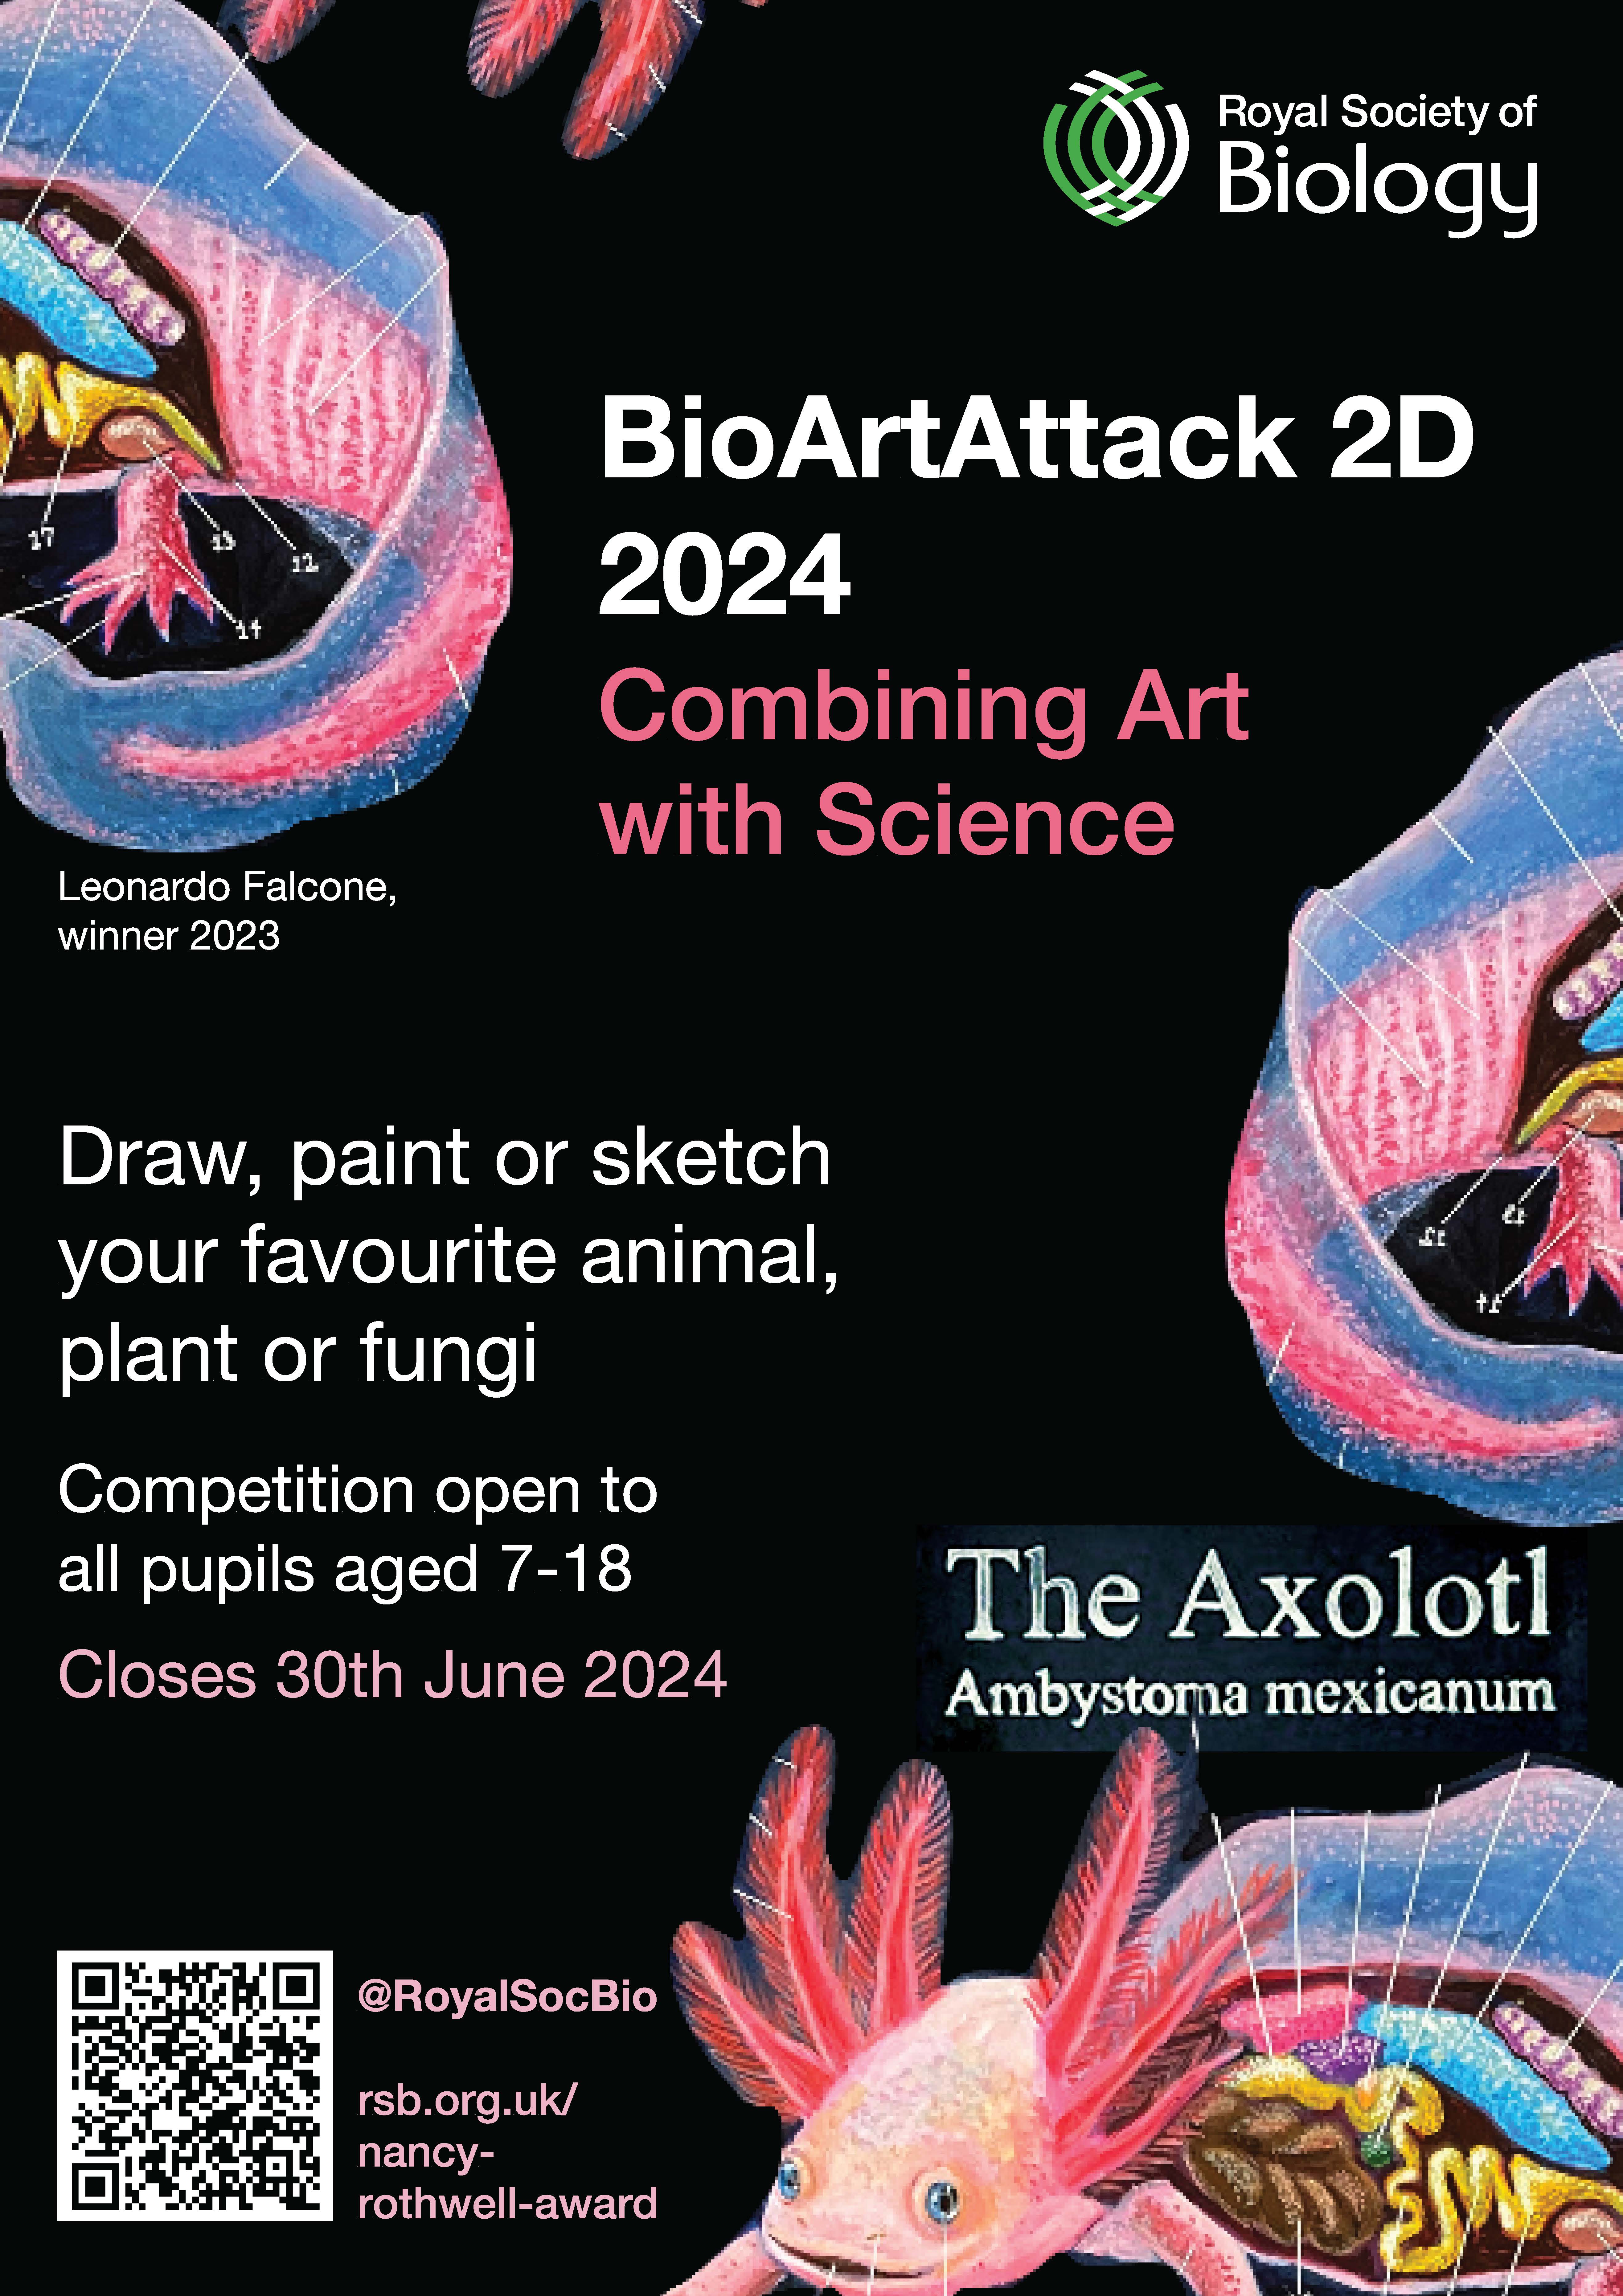 Biological art competition